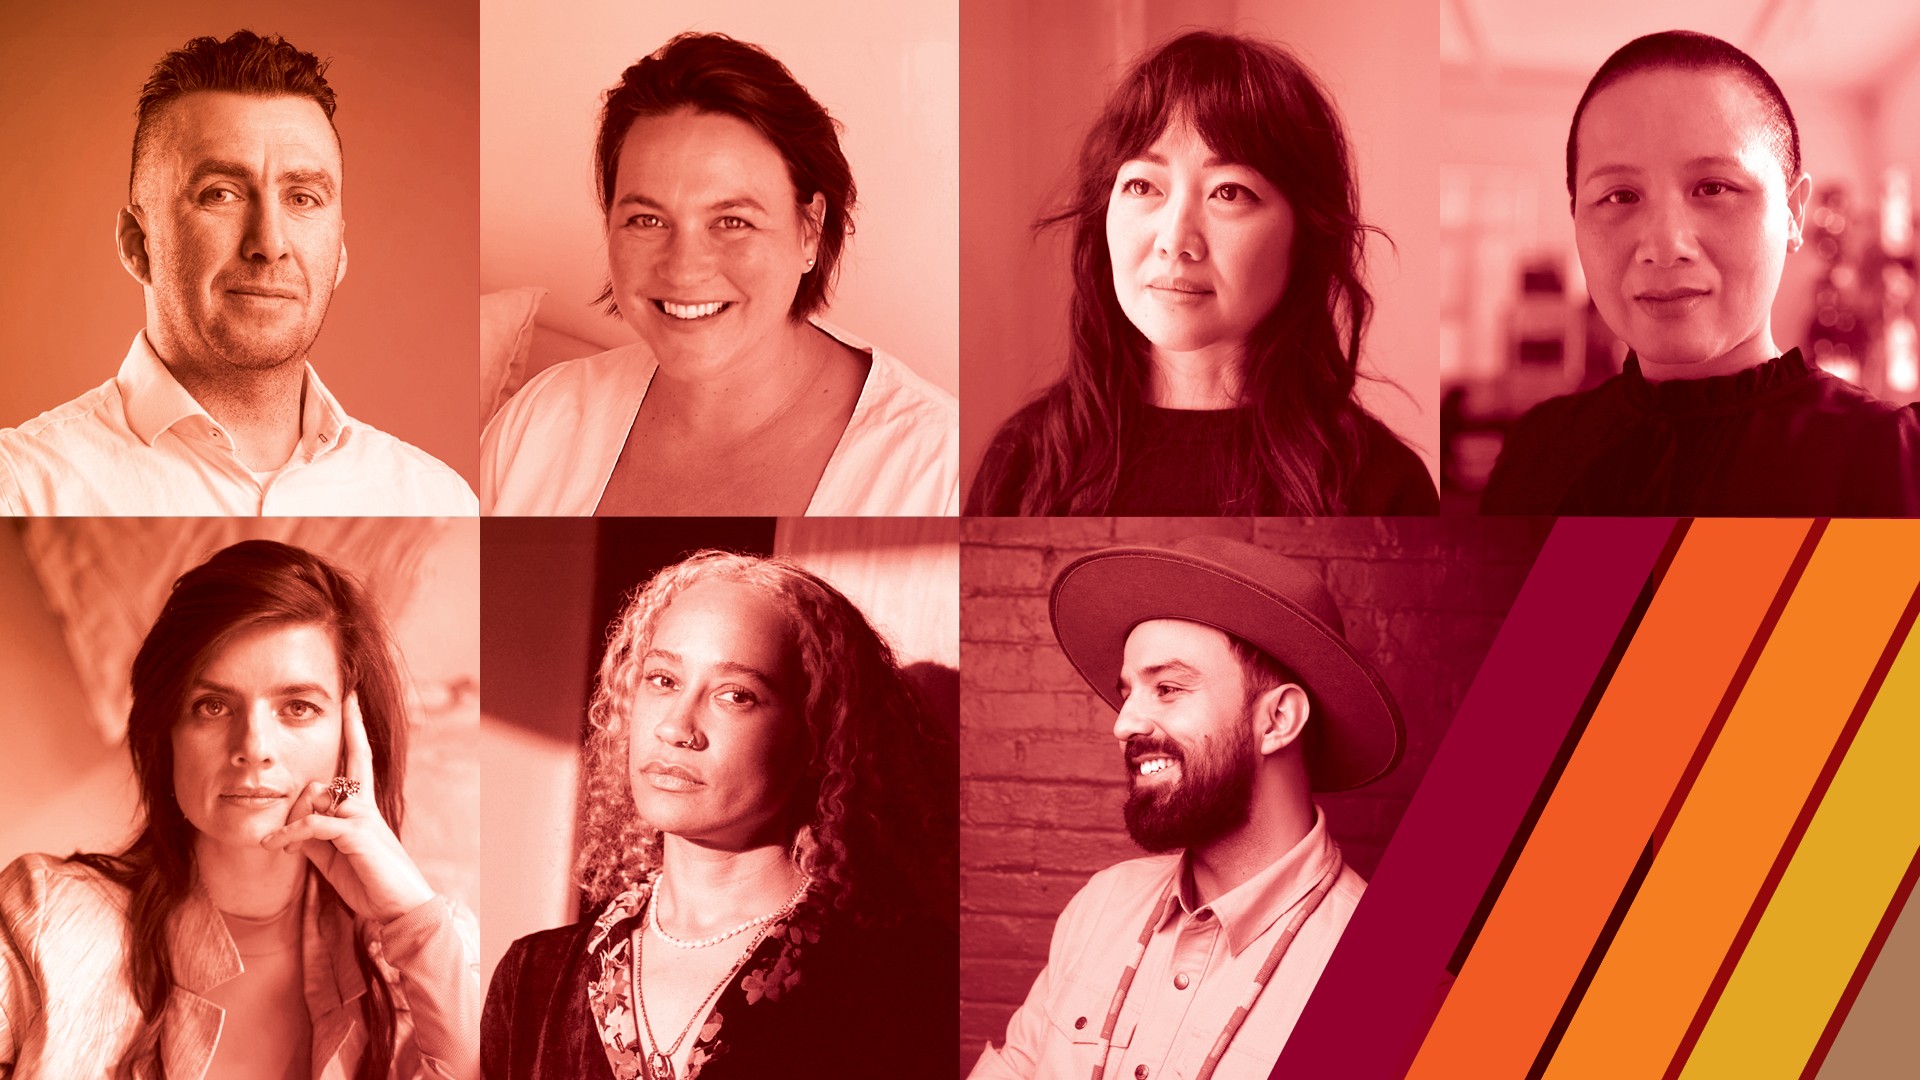 Headshots of the seven longlisted artists with a red, pink or orange tint over their photos